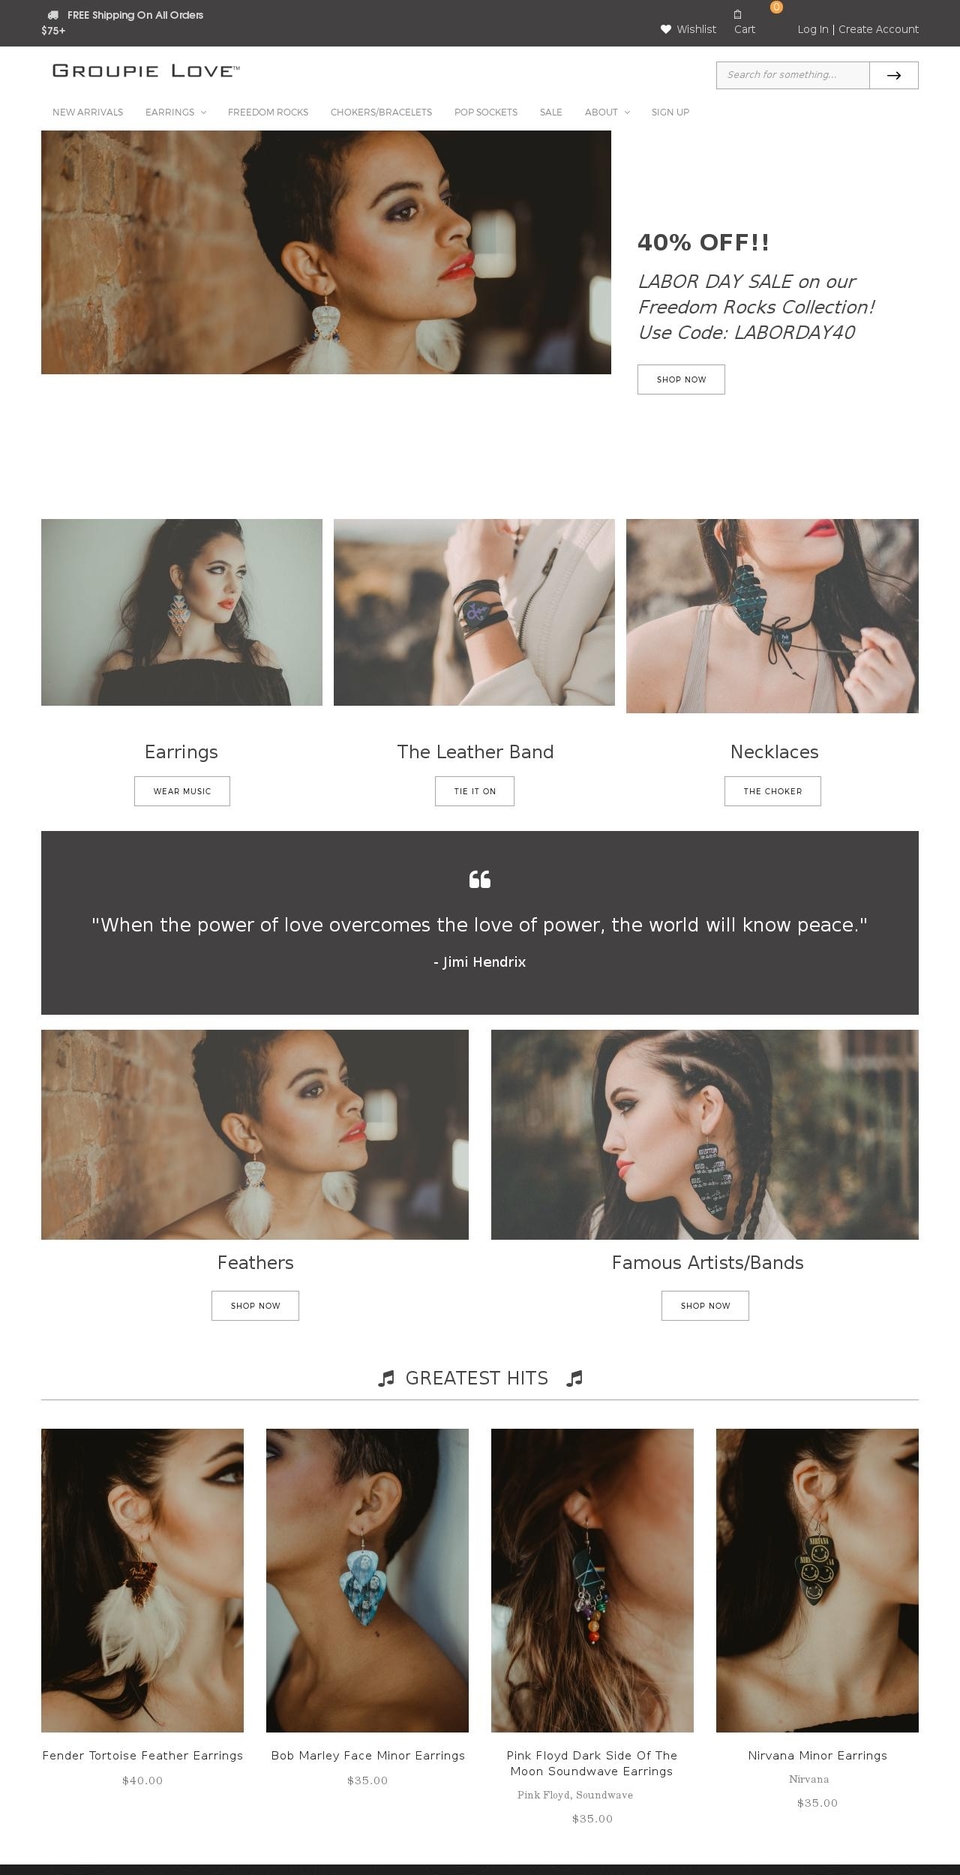 Copy of Shopify theme site example groupielove.com